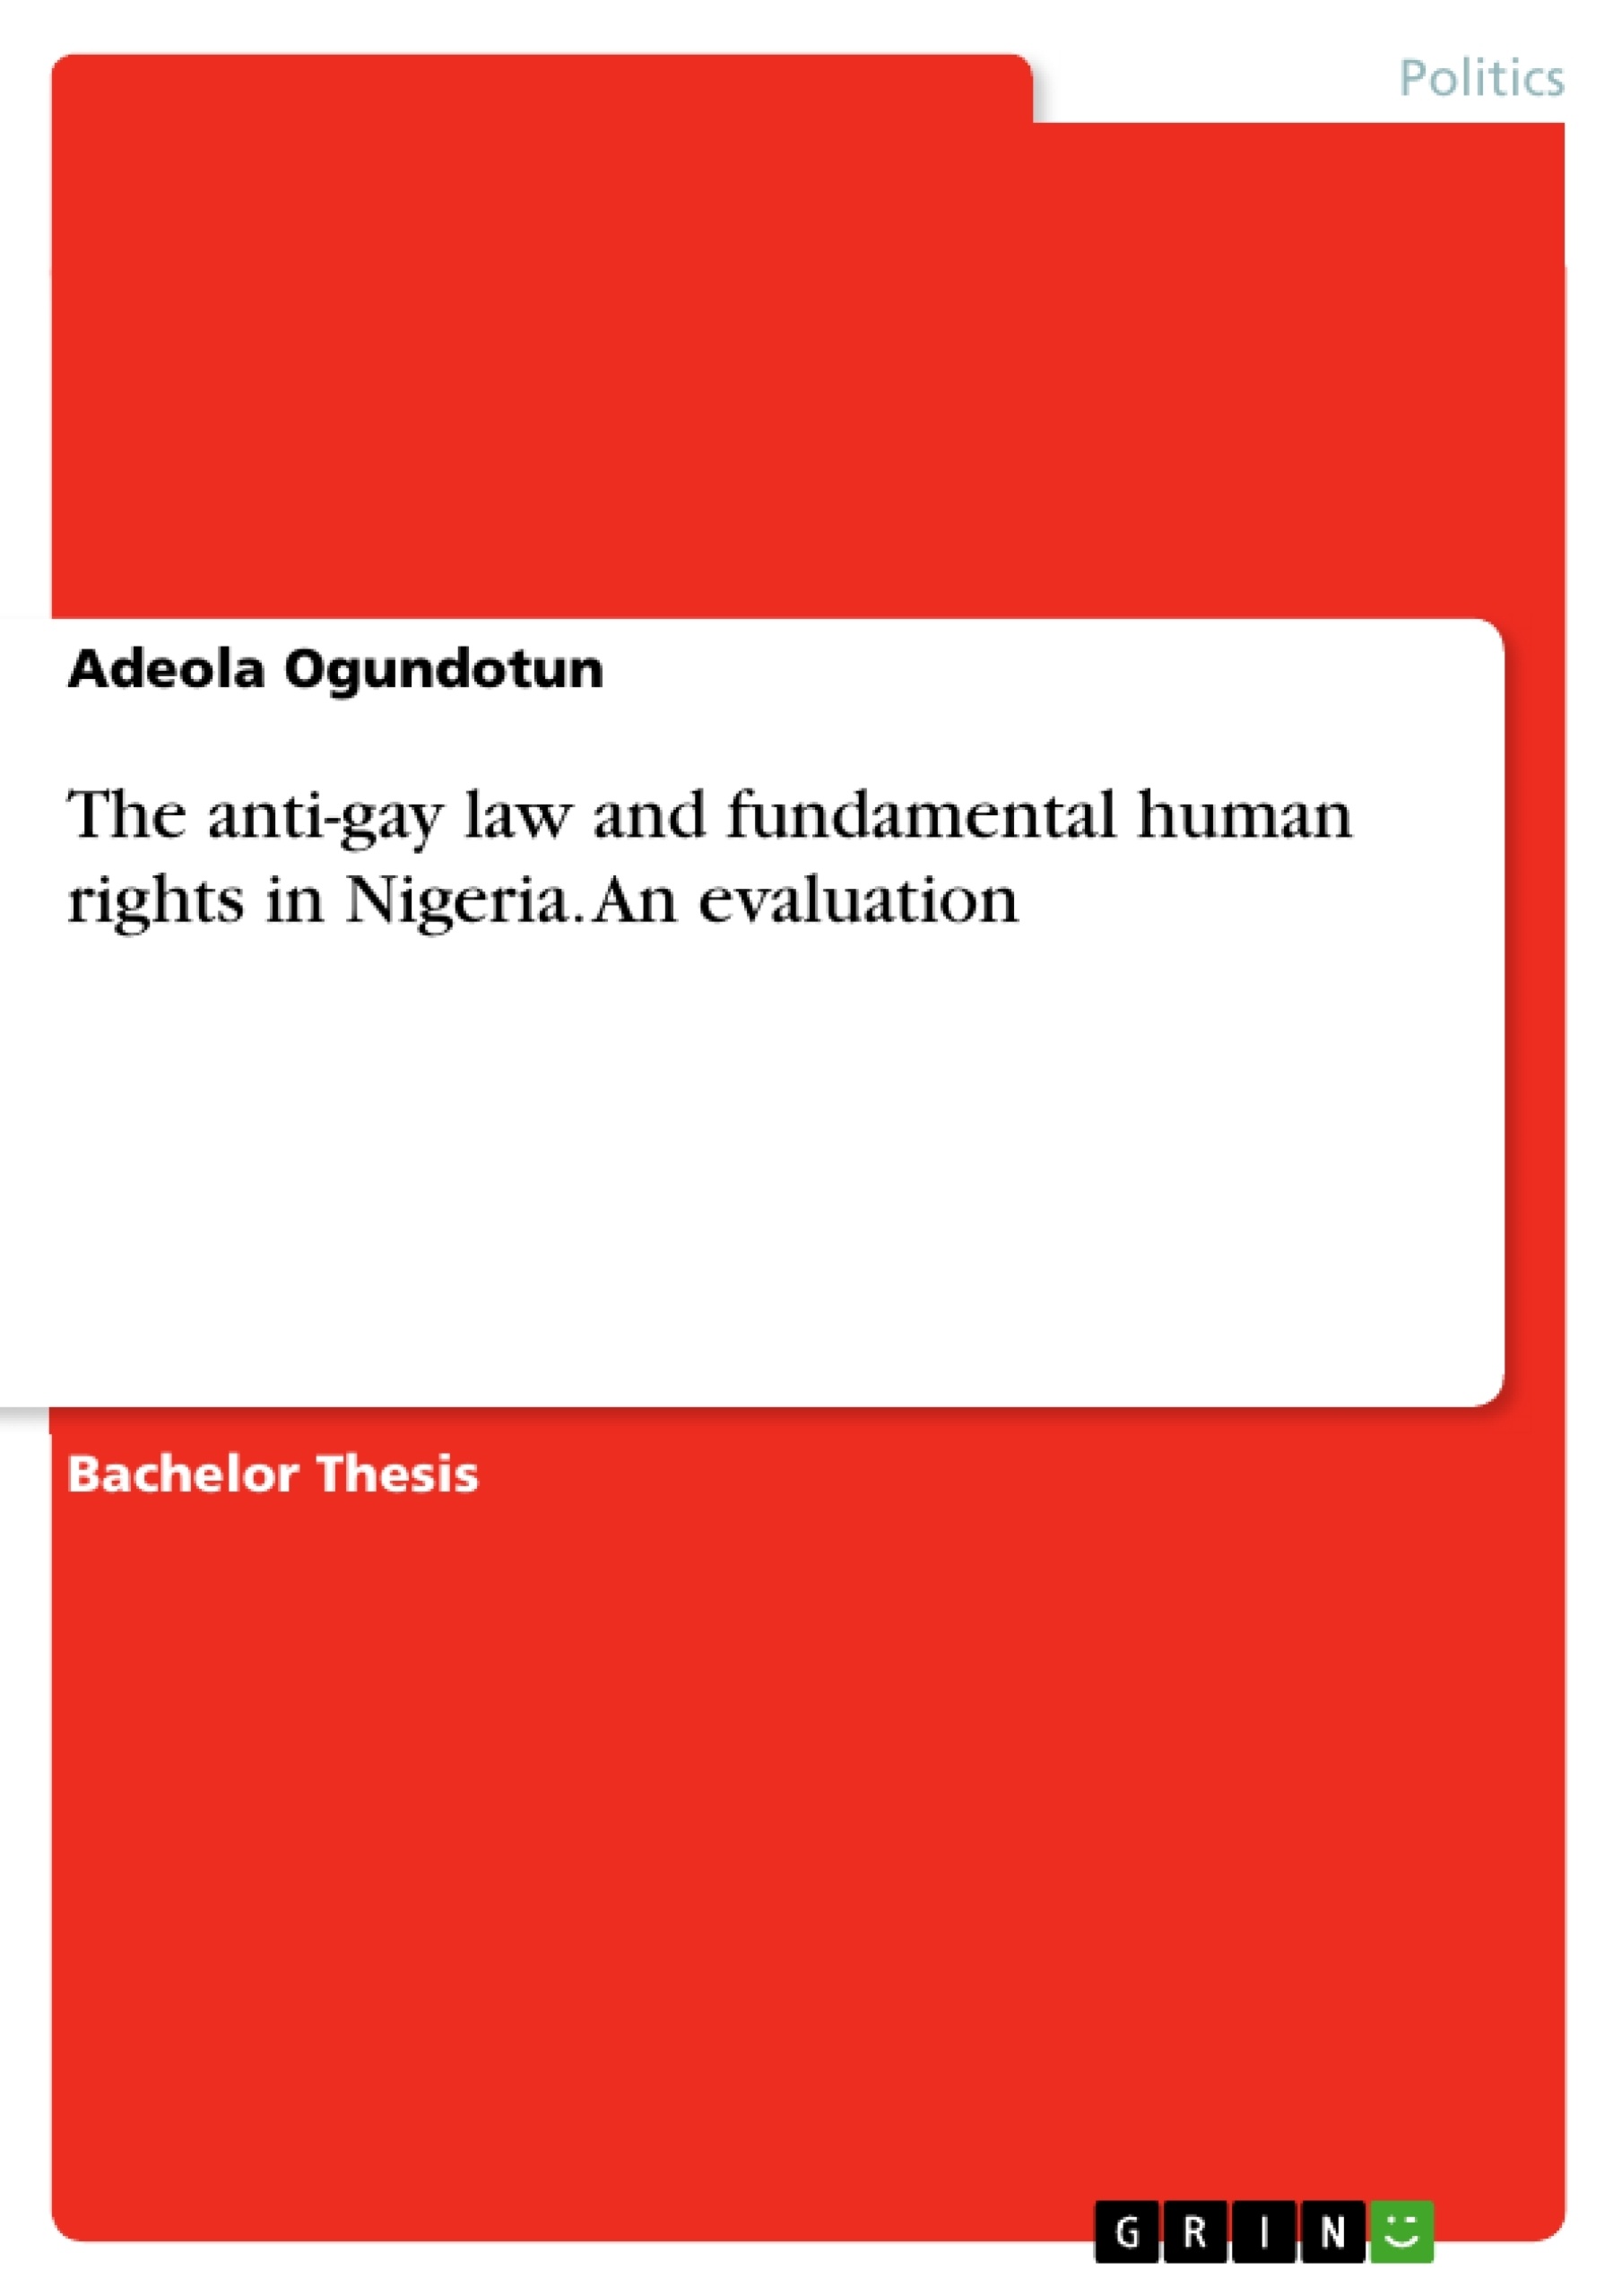 Title: The anti-gay law and fundamental human rights in Nigeria. An evaluation